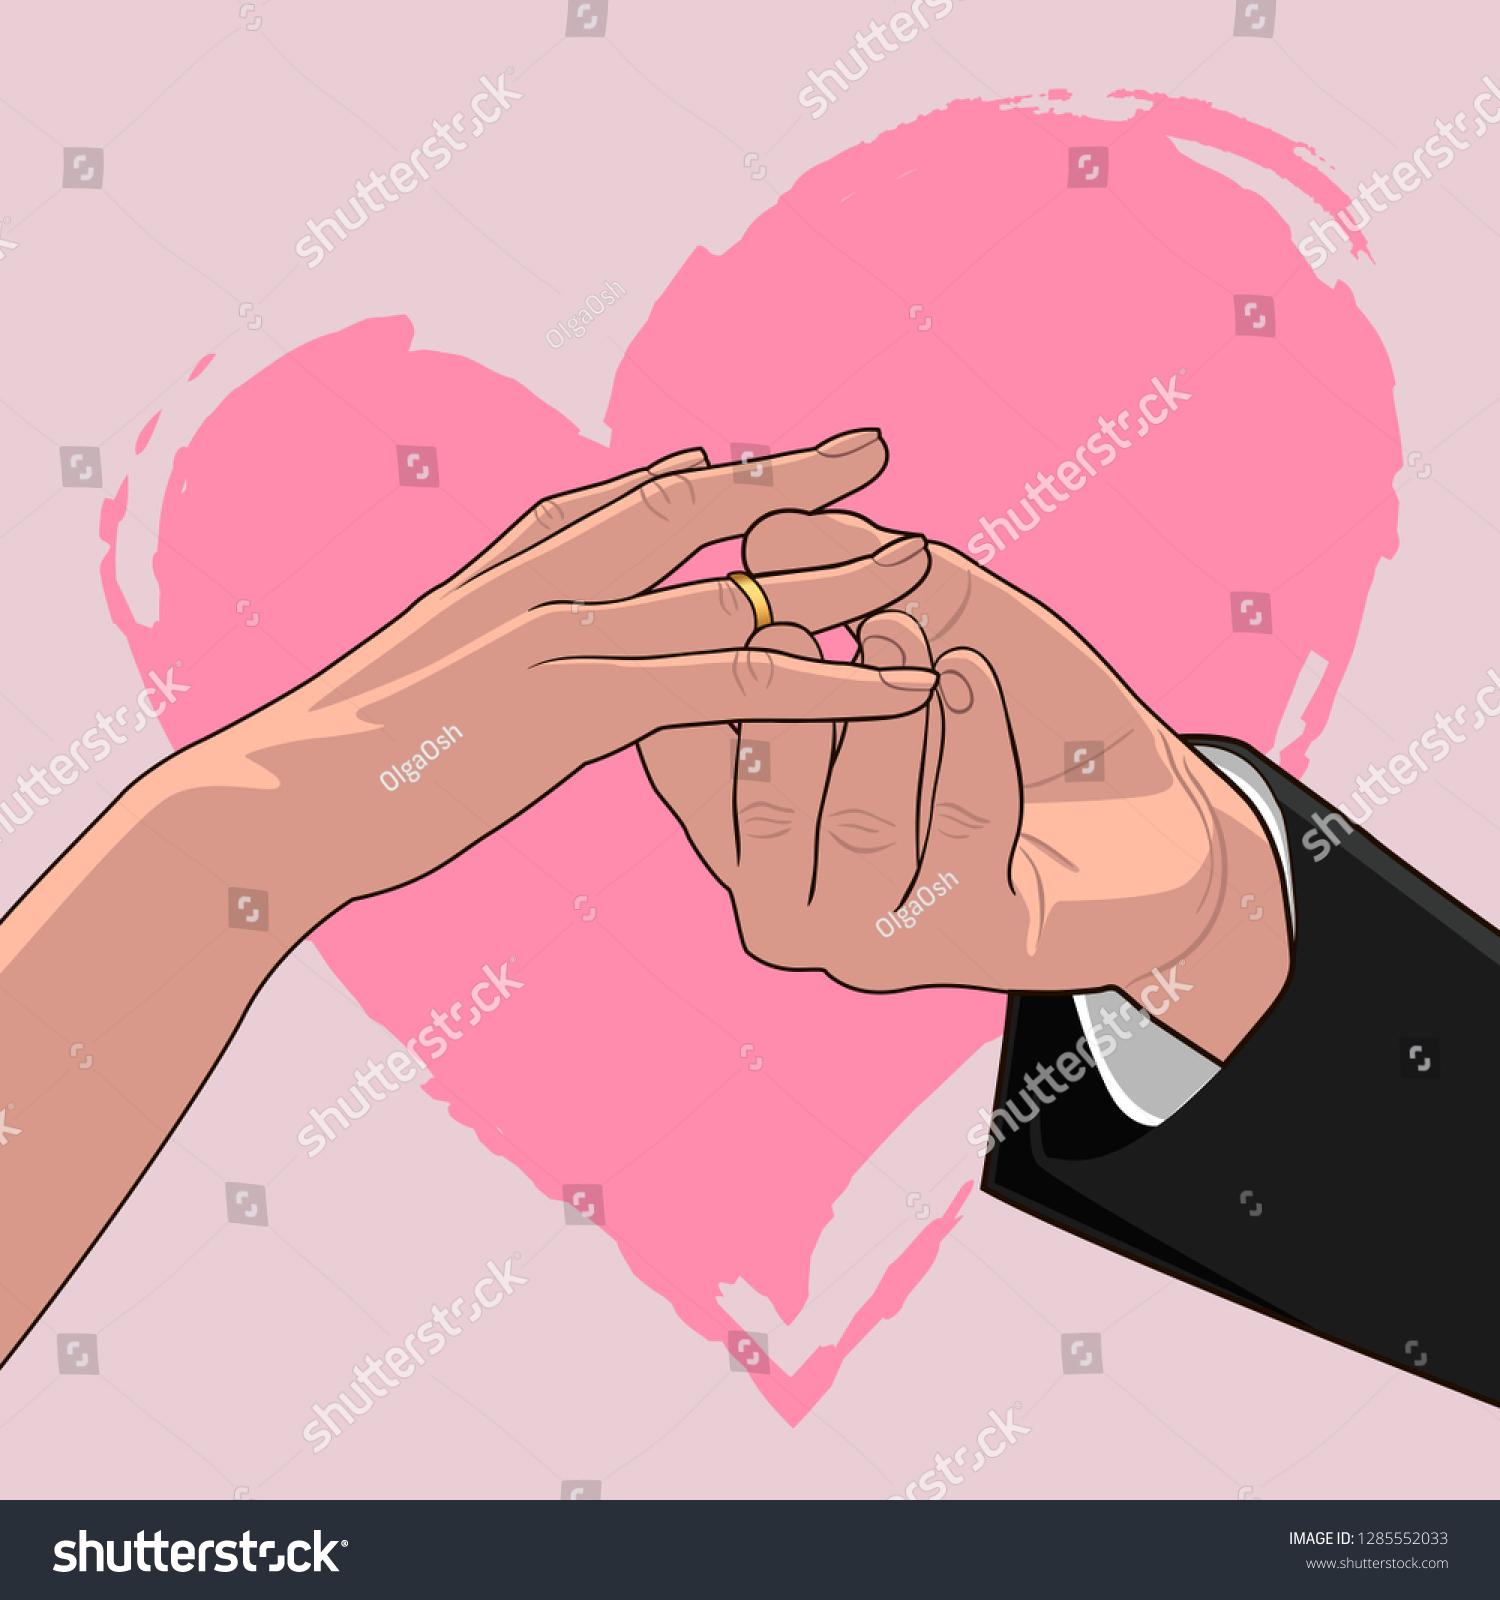 SVG of Valentine's day card with male and female hands on the background of a pink heart. The groom puts the ring on the bride's finger. Wedding. Girl's hand, man's hand, ring. Gold ring on the ring finger. svg